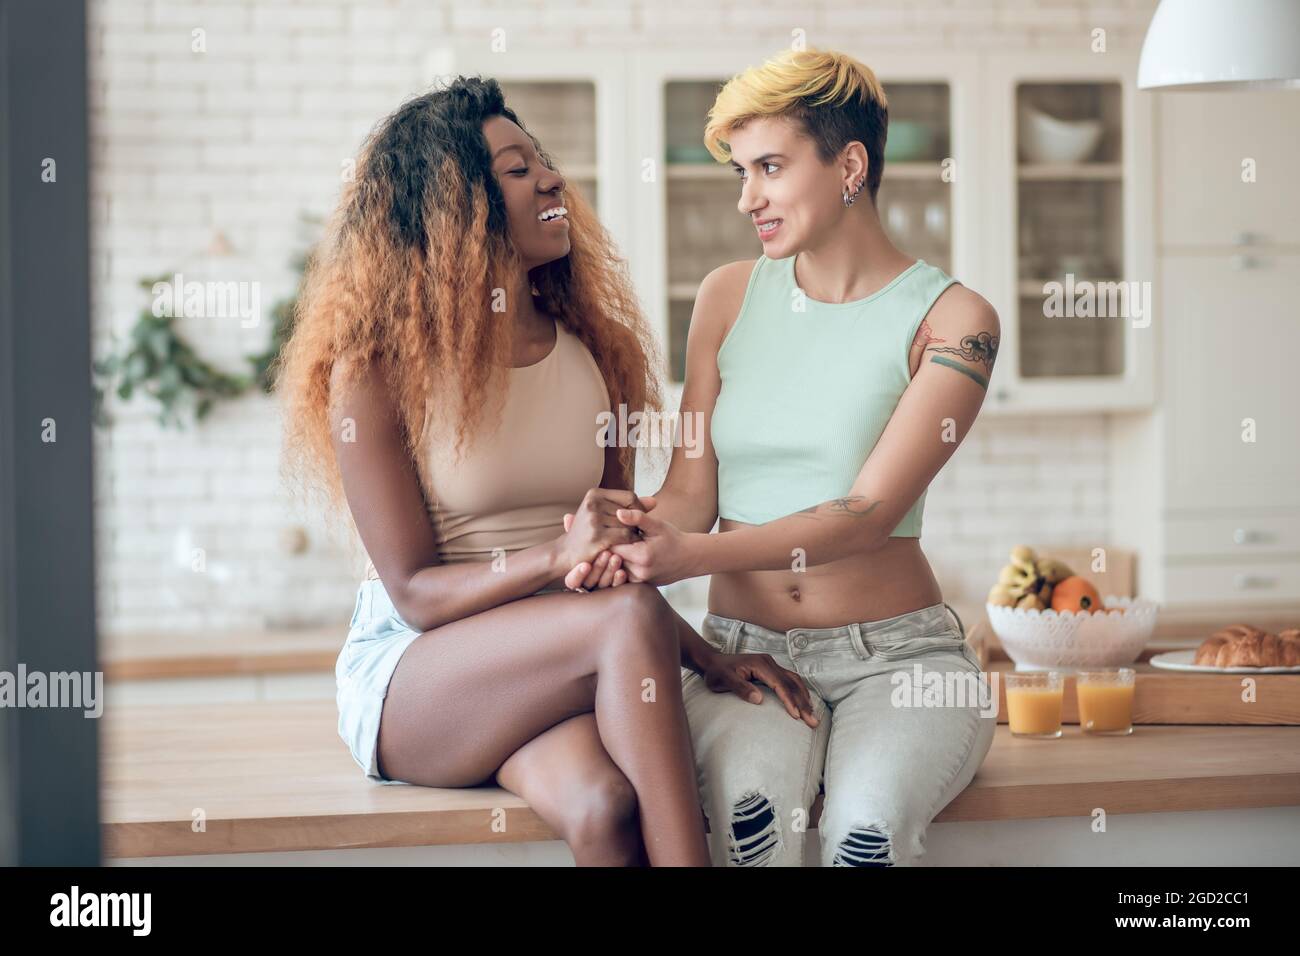 Two female friends holding hands sitting on table Stock Photo